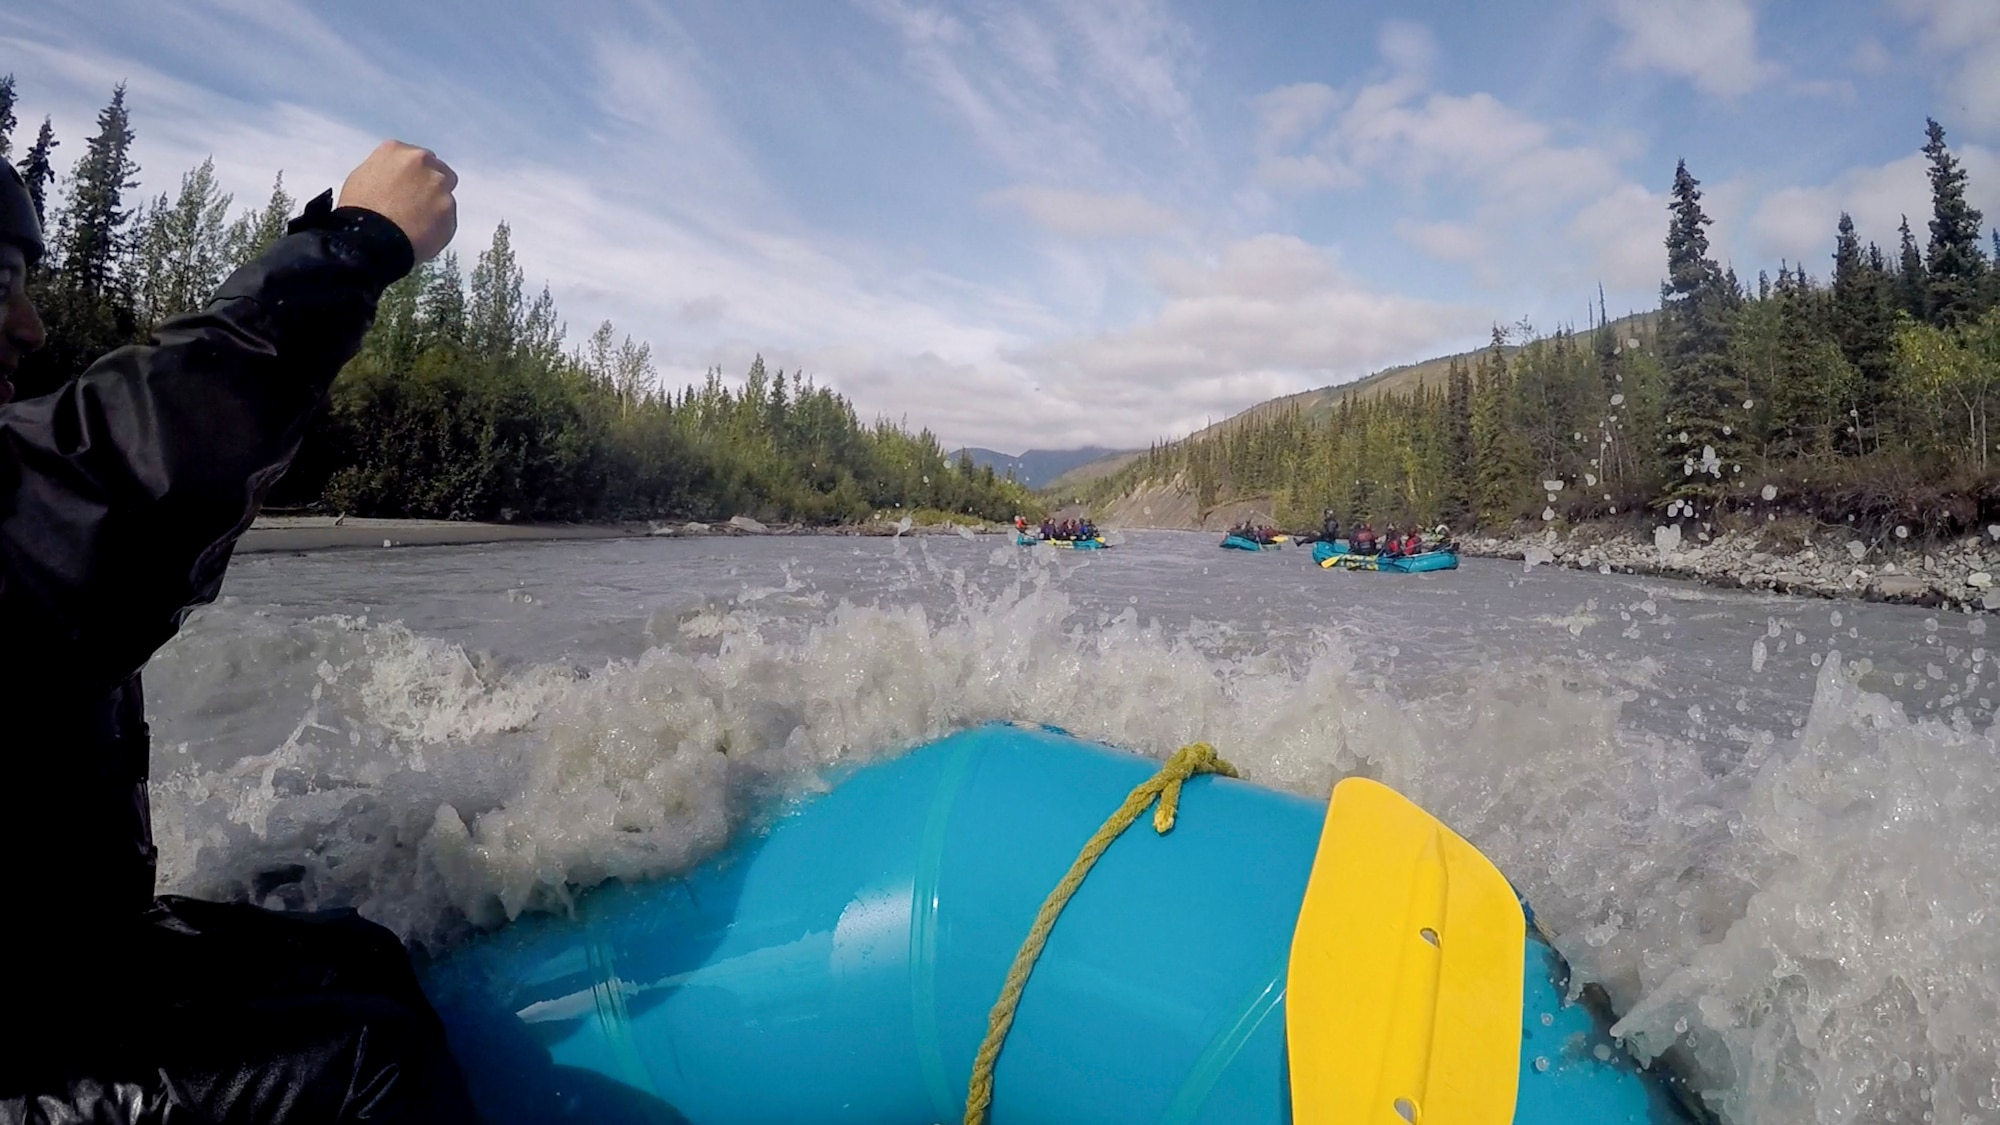 Members from the 673d Civil Engineer Group ride whitewater rapids on the Matanuska River, Alaska, as a Task Force True North activity July 26, 2019. Task Force True North is an initiative started in July 2018 to address Comprehensive Airman Fitness and decrease negative outcomes like sexual assault, suicide, domestic and workplace violence. Task Force True North embeds a religious support team and mental health counselors in groups to decentralize resources available to Airmen.